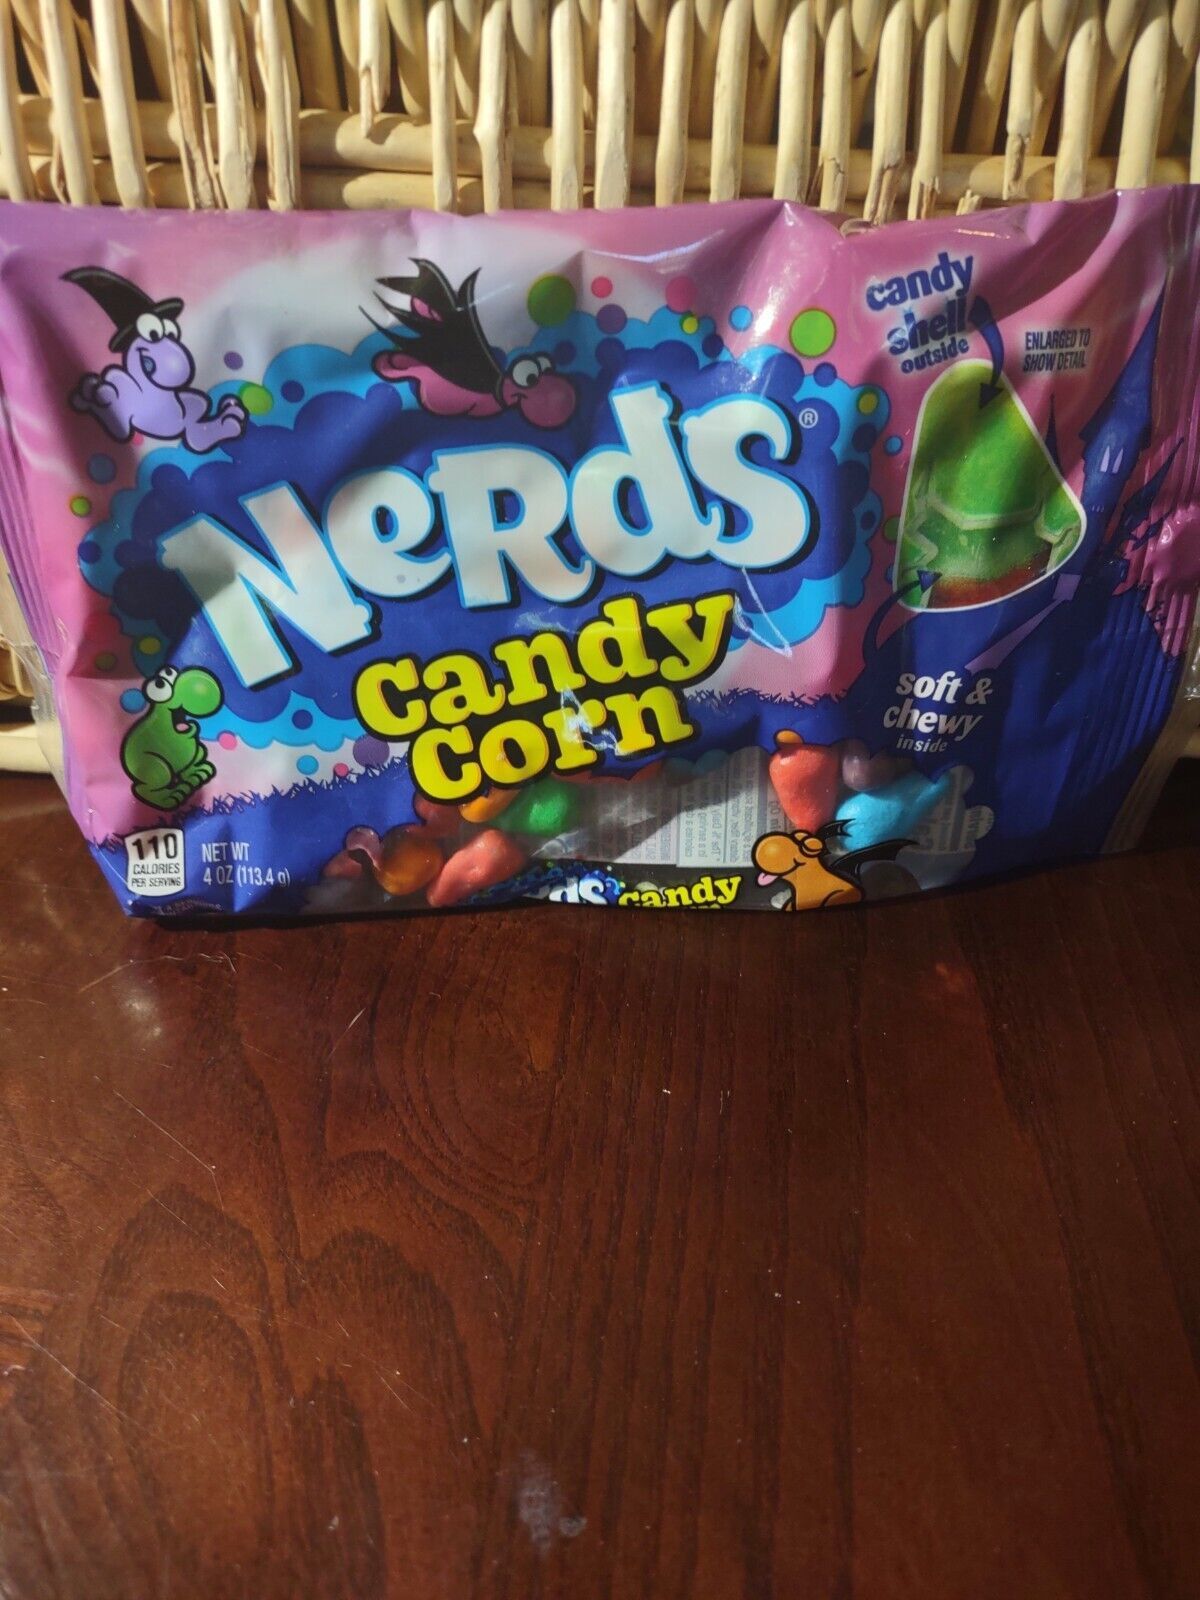 Nerds CANDY CORN Soft & Chewy Candy Fall Halloween -1ea 4oz Bag-Brand New-SHIP24 - $29.58